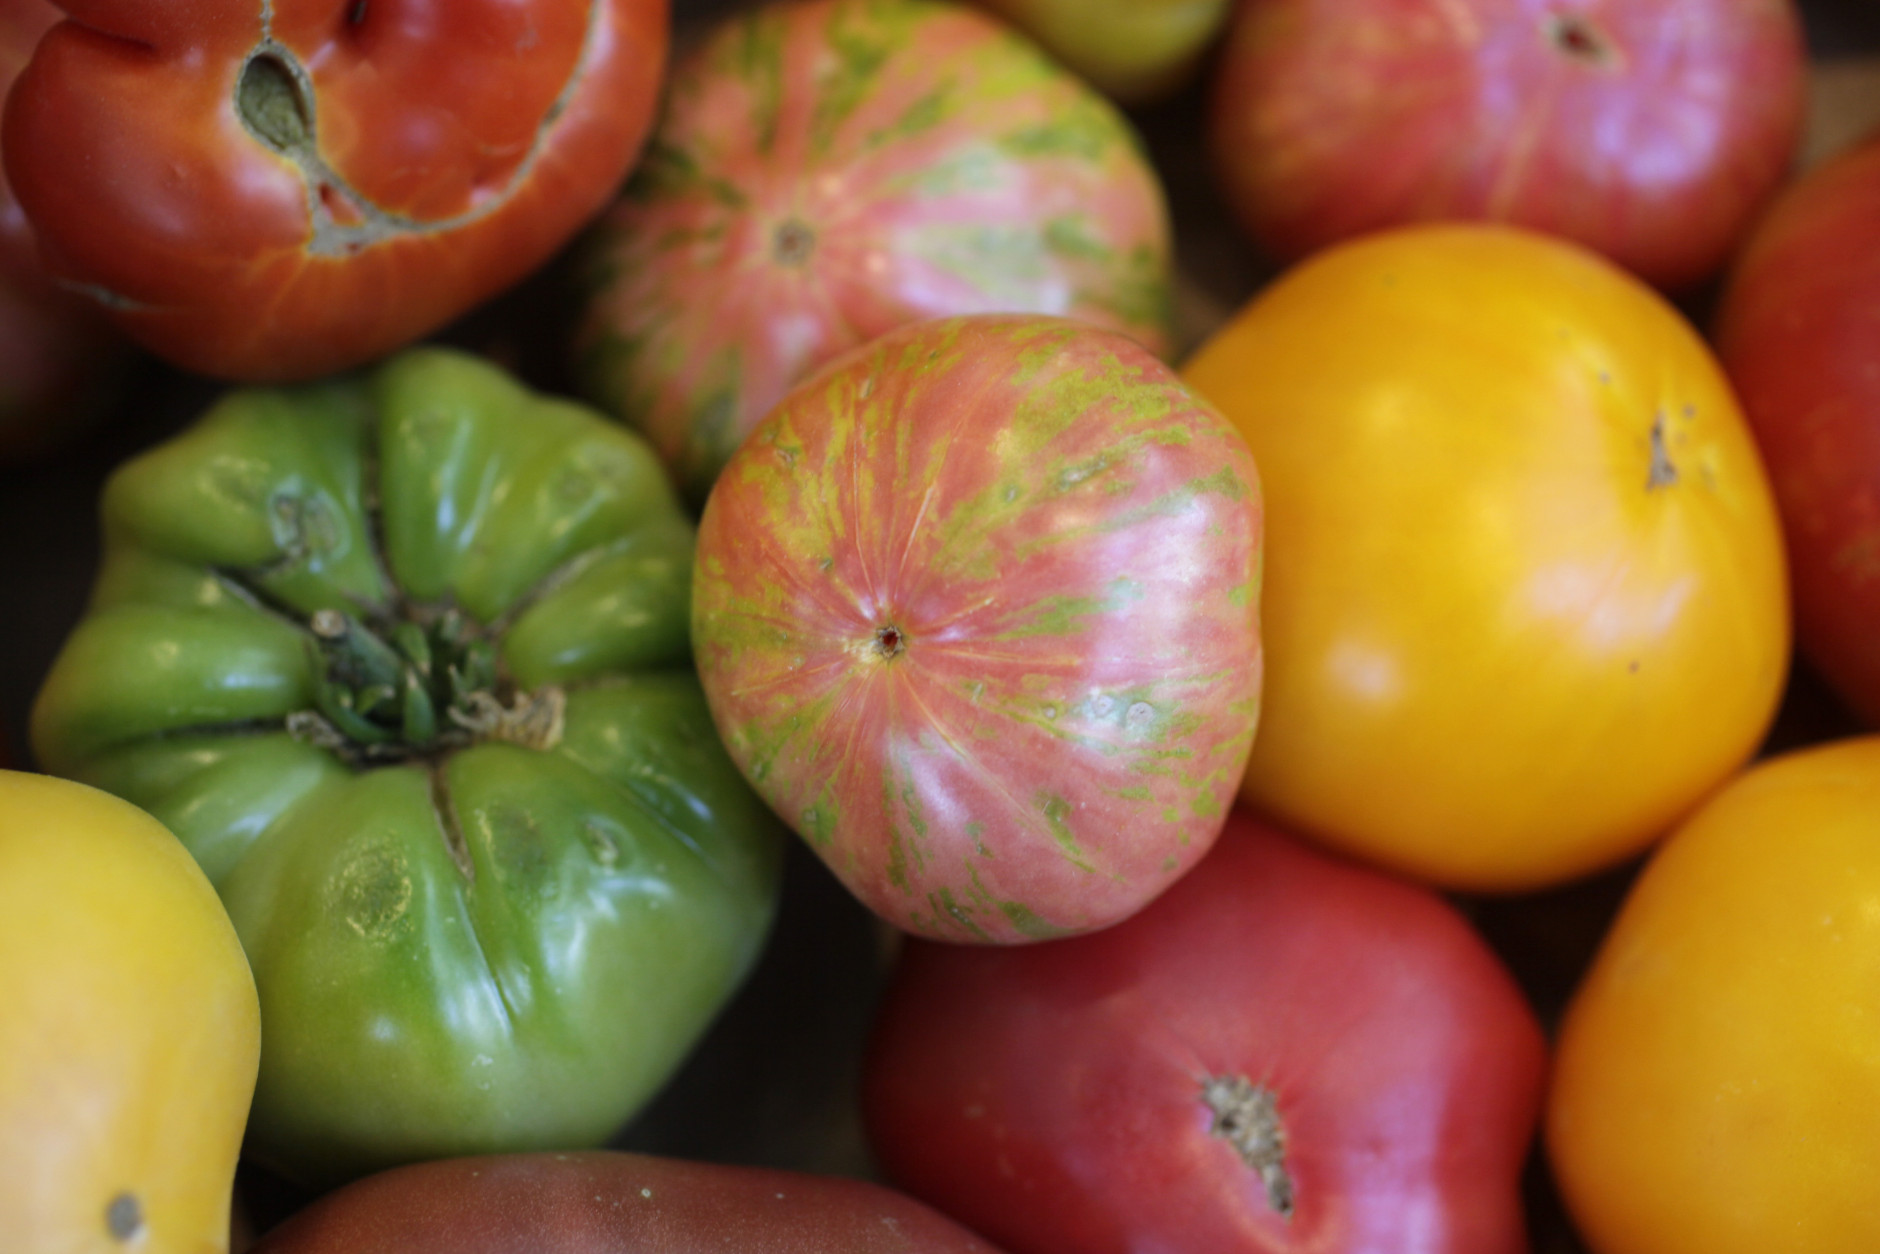 Shown is a selection of multi-colored heirloom tomatoes at the Oxbow Produce and Grocery in Napa, Calif., Monday, June 29, 2009. (AP Photo/Eric Risberg)